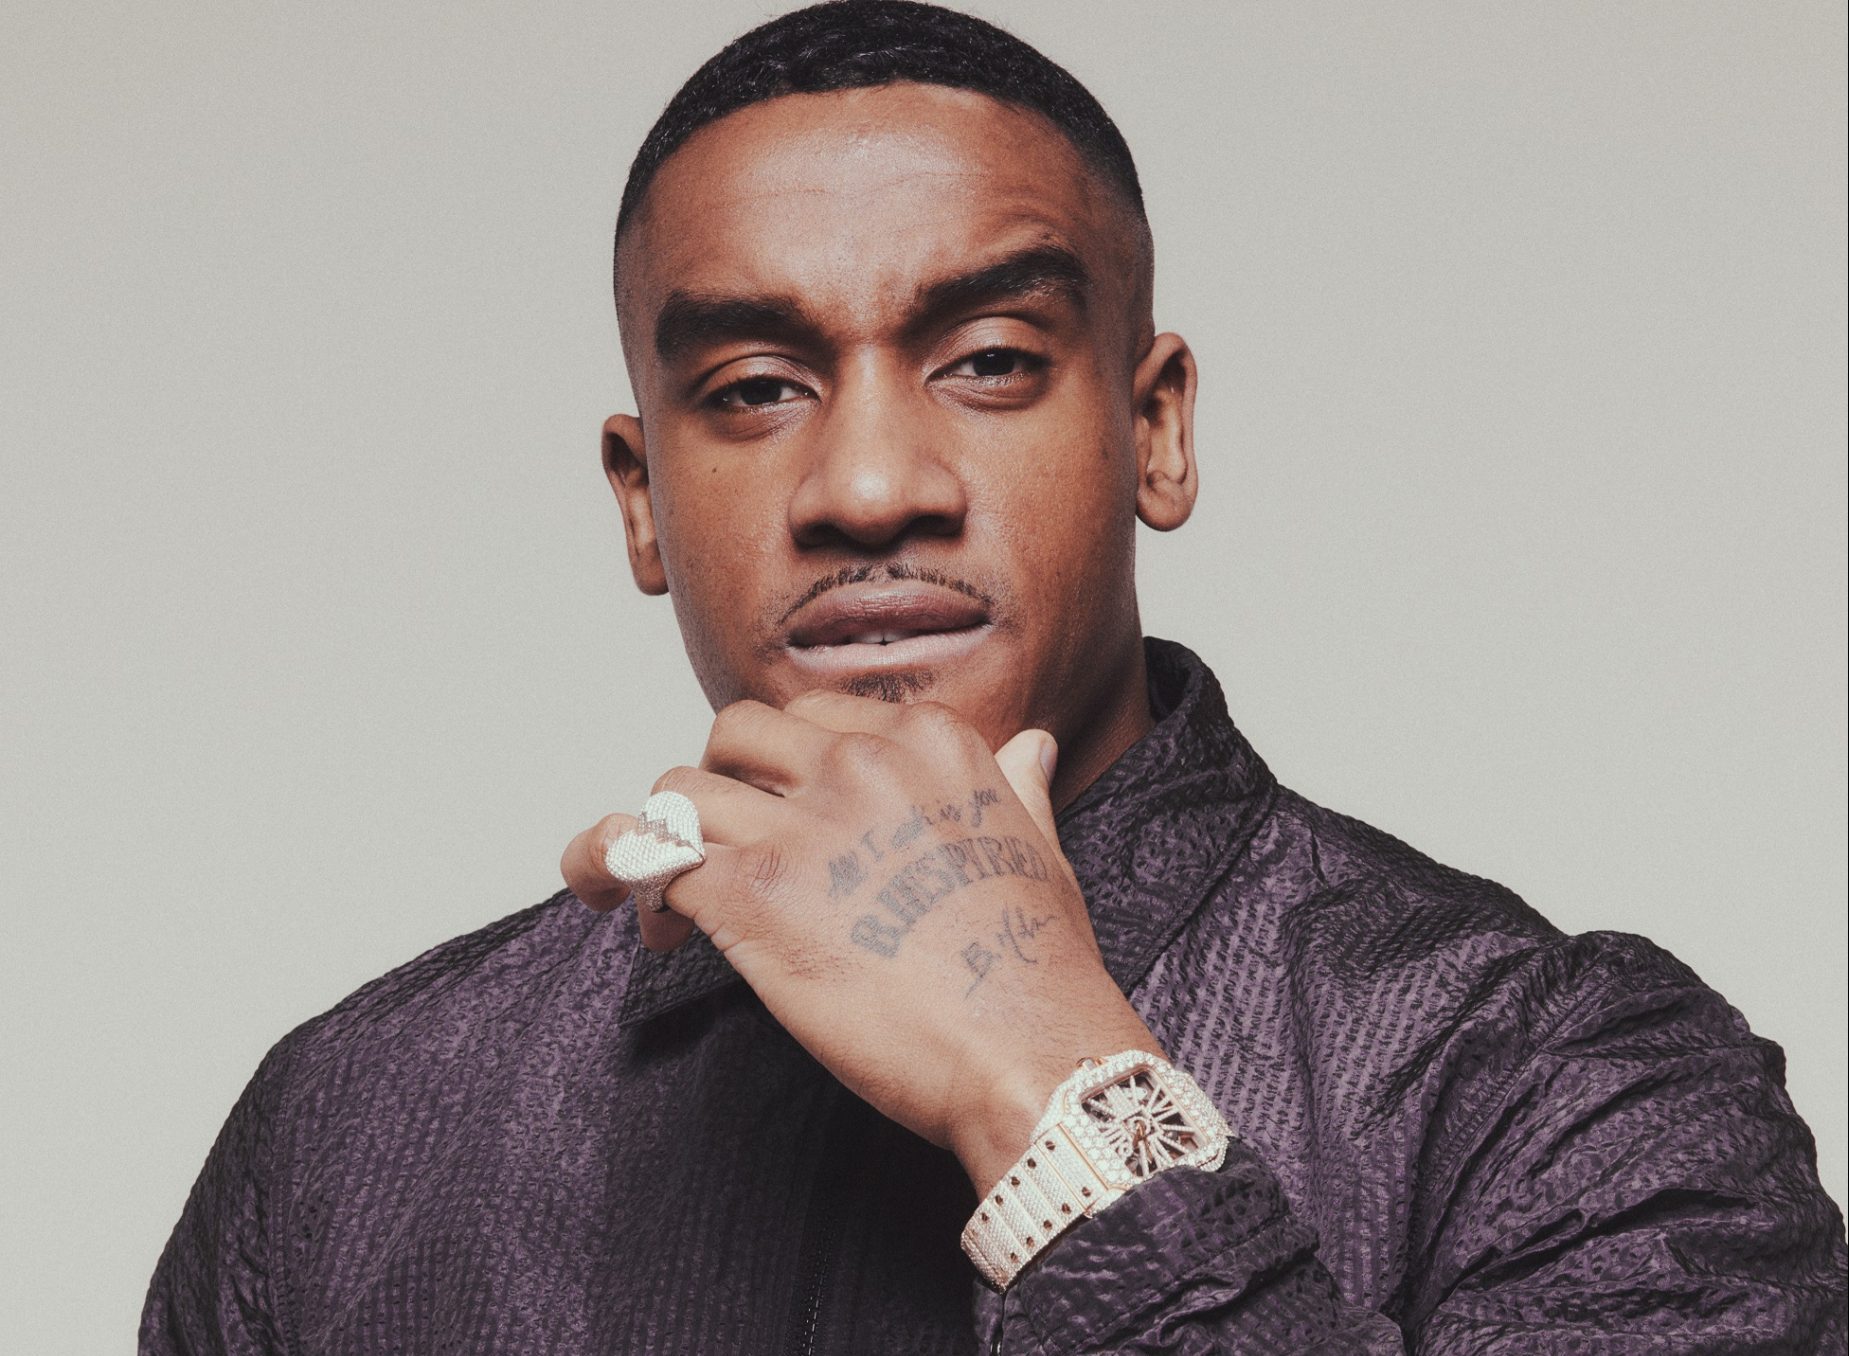 Guy Ritchie opened the door to life as a film star - it's an amazing chance  to build on my career, says Bugzy Malone